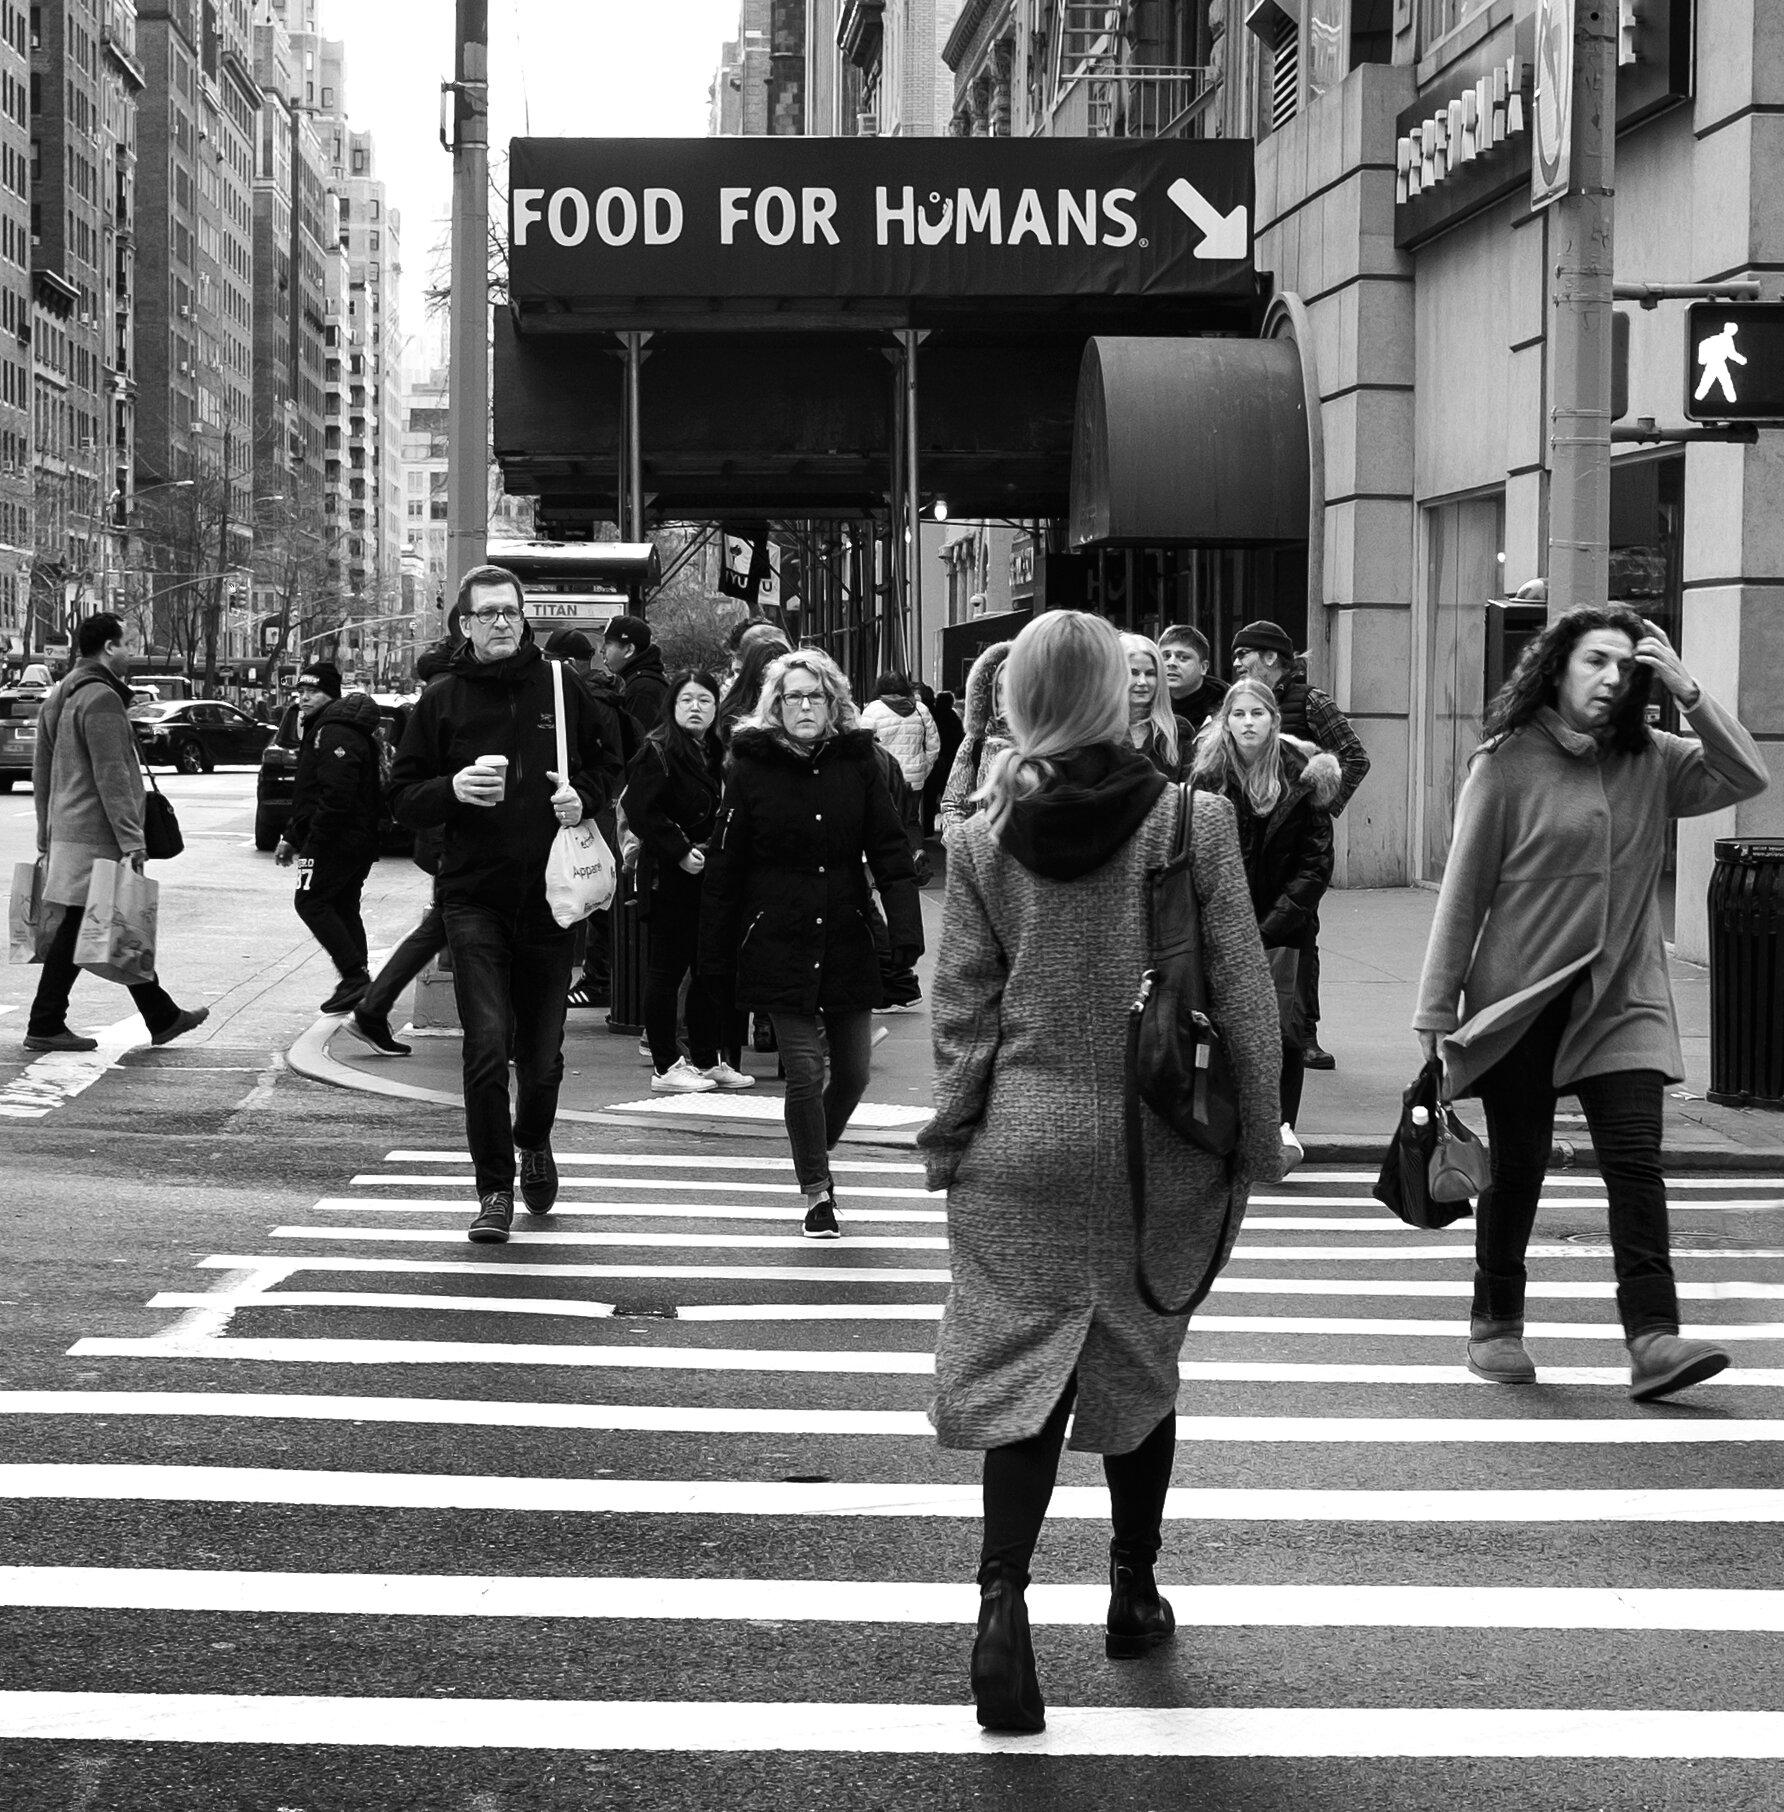 Food for Humans?, 7th Ave, NYC 2019